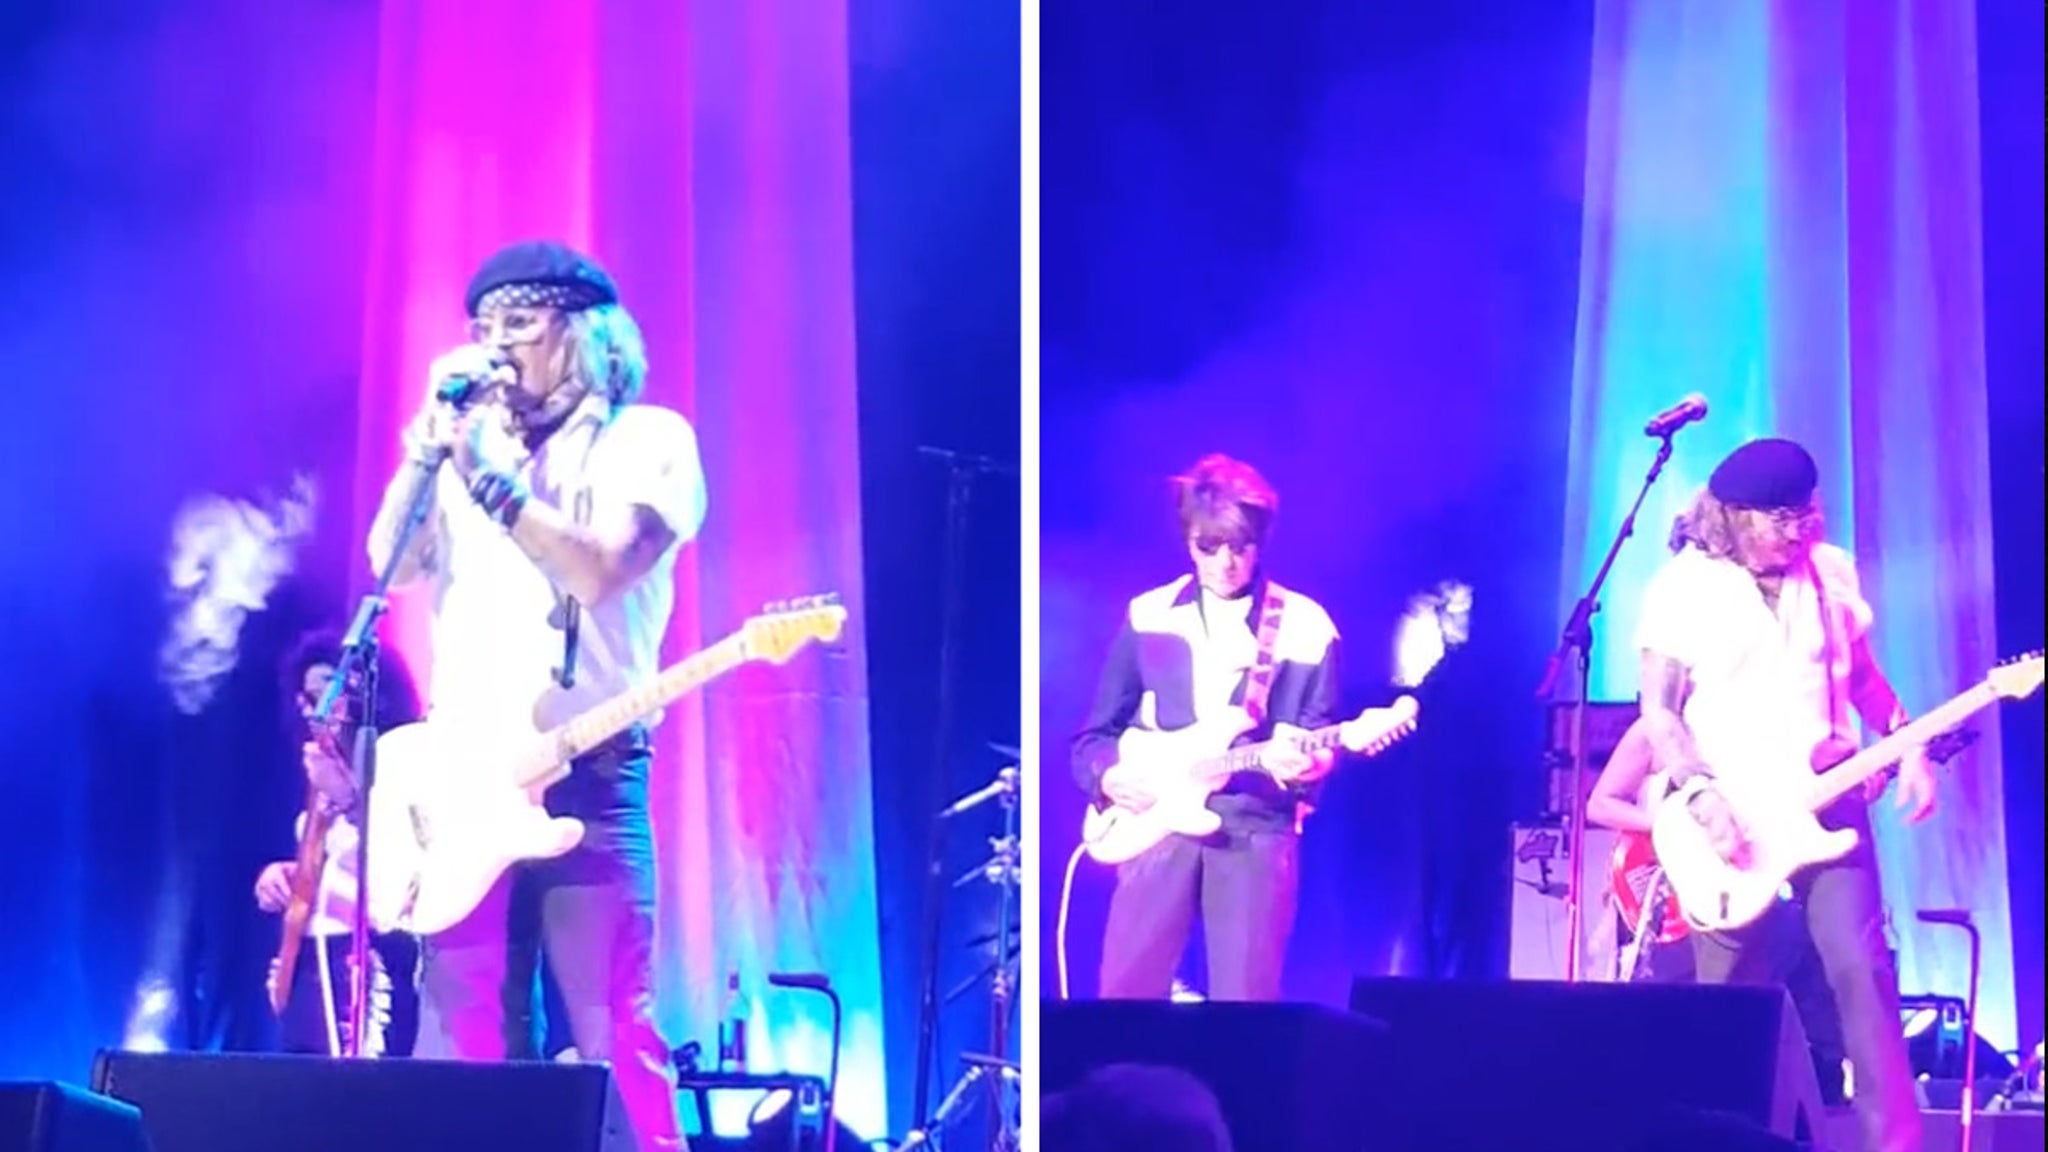 Johnny Depp Rocks Out Onstage at Concert in England with Jeff Beck